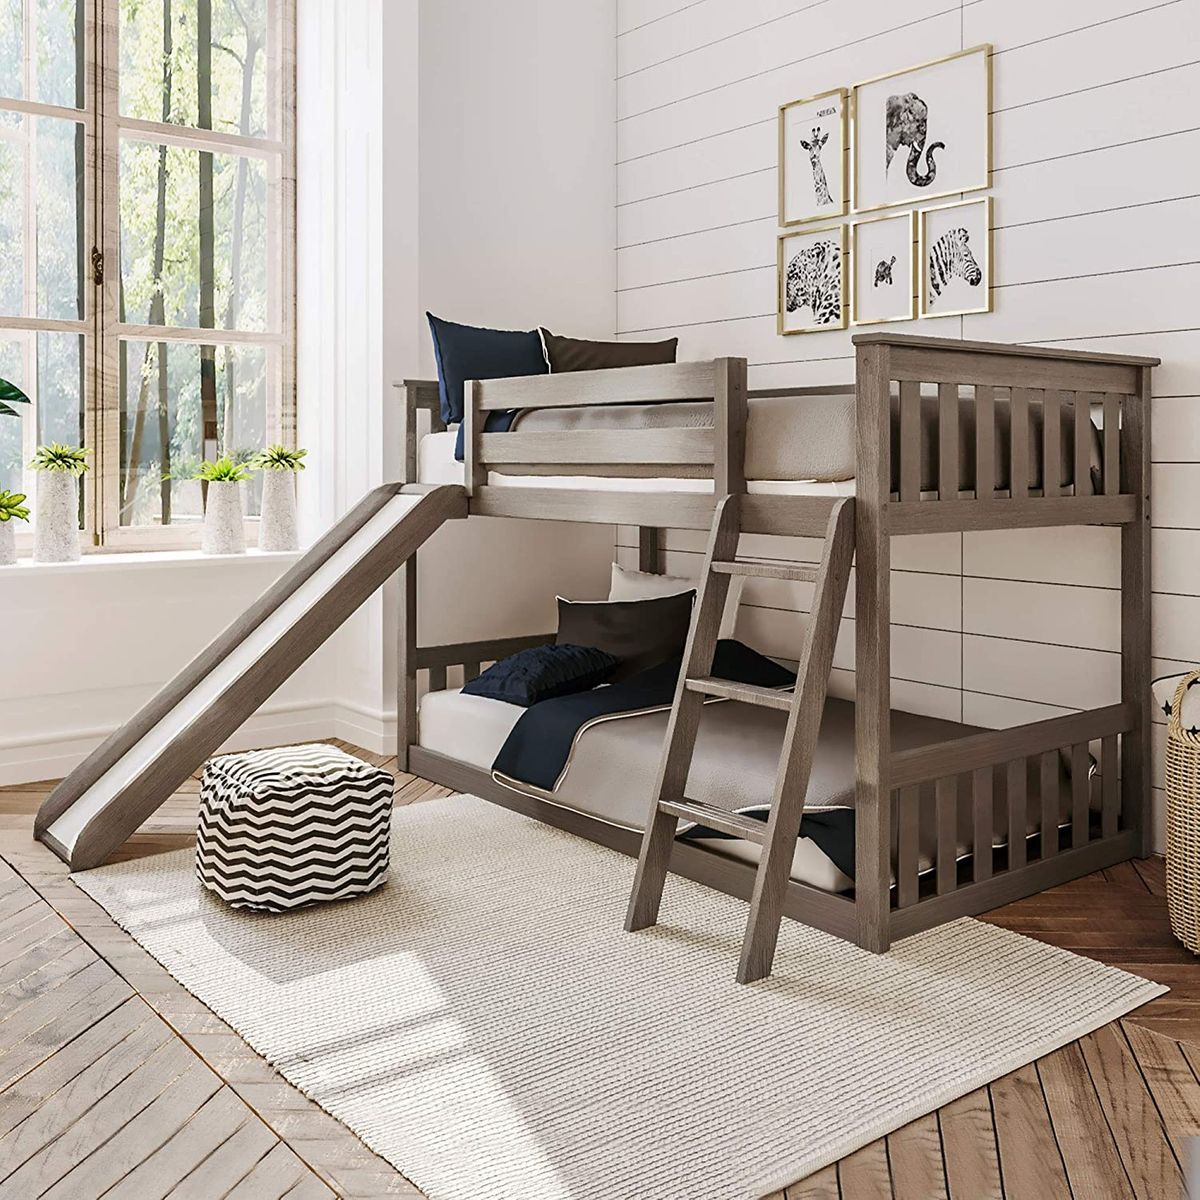 8 Best Bunk Beds 2020 The Strategist, Bunk Beds With Side Steps